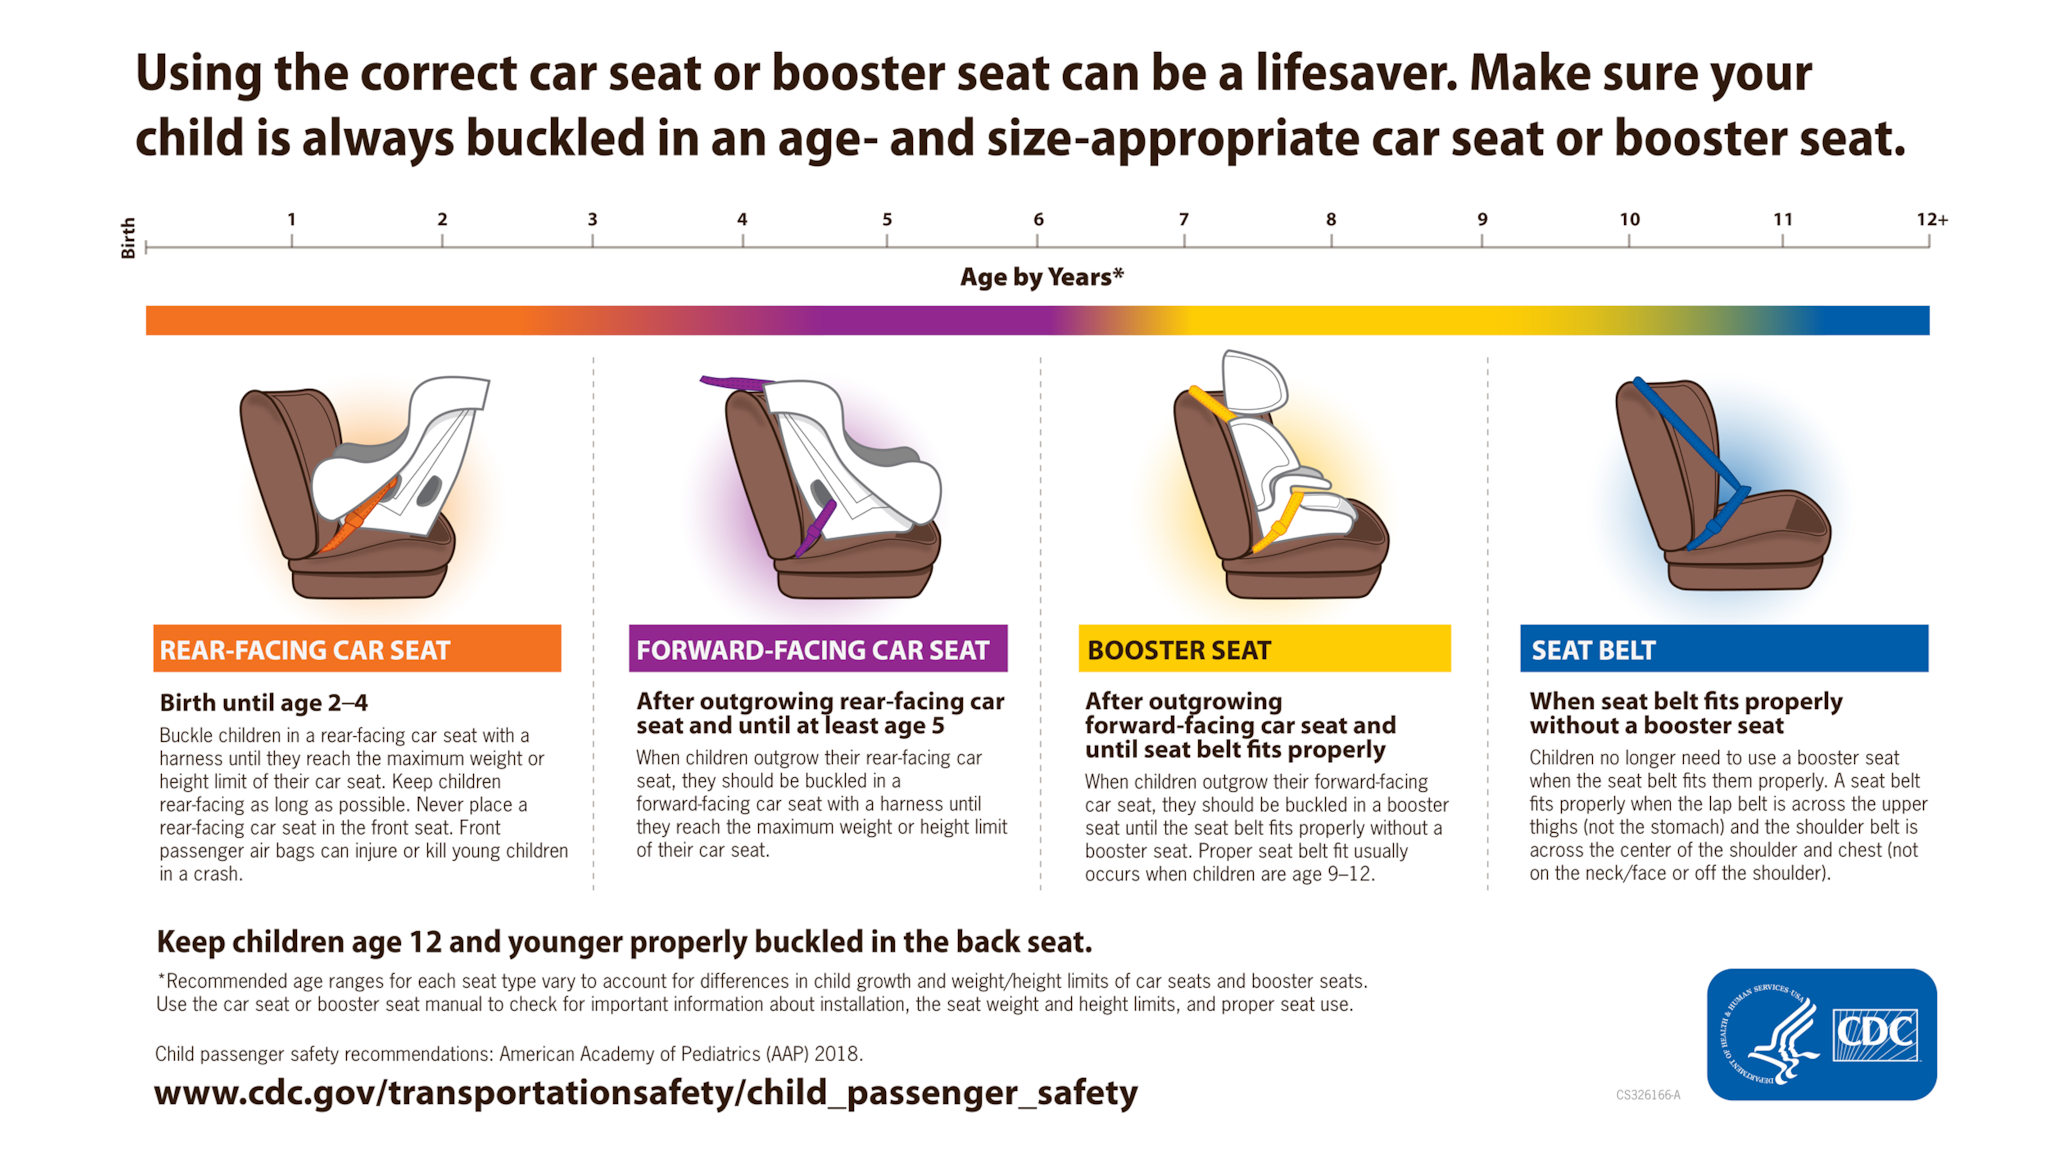 https://www.cdc.gov/injury/images/features/child-passenger-safety/infographic_child-passenger-safety-2021_2500x1406.png